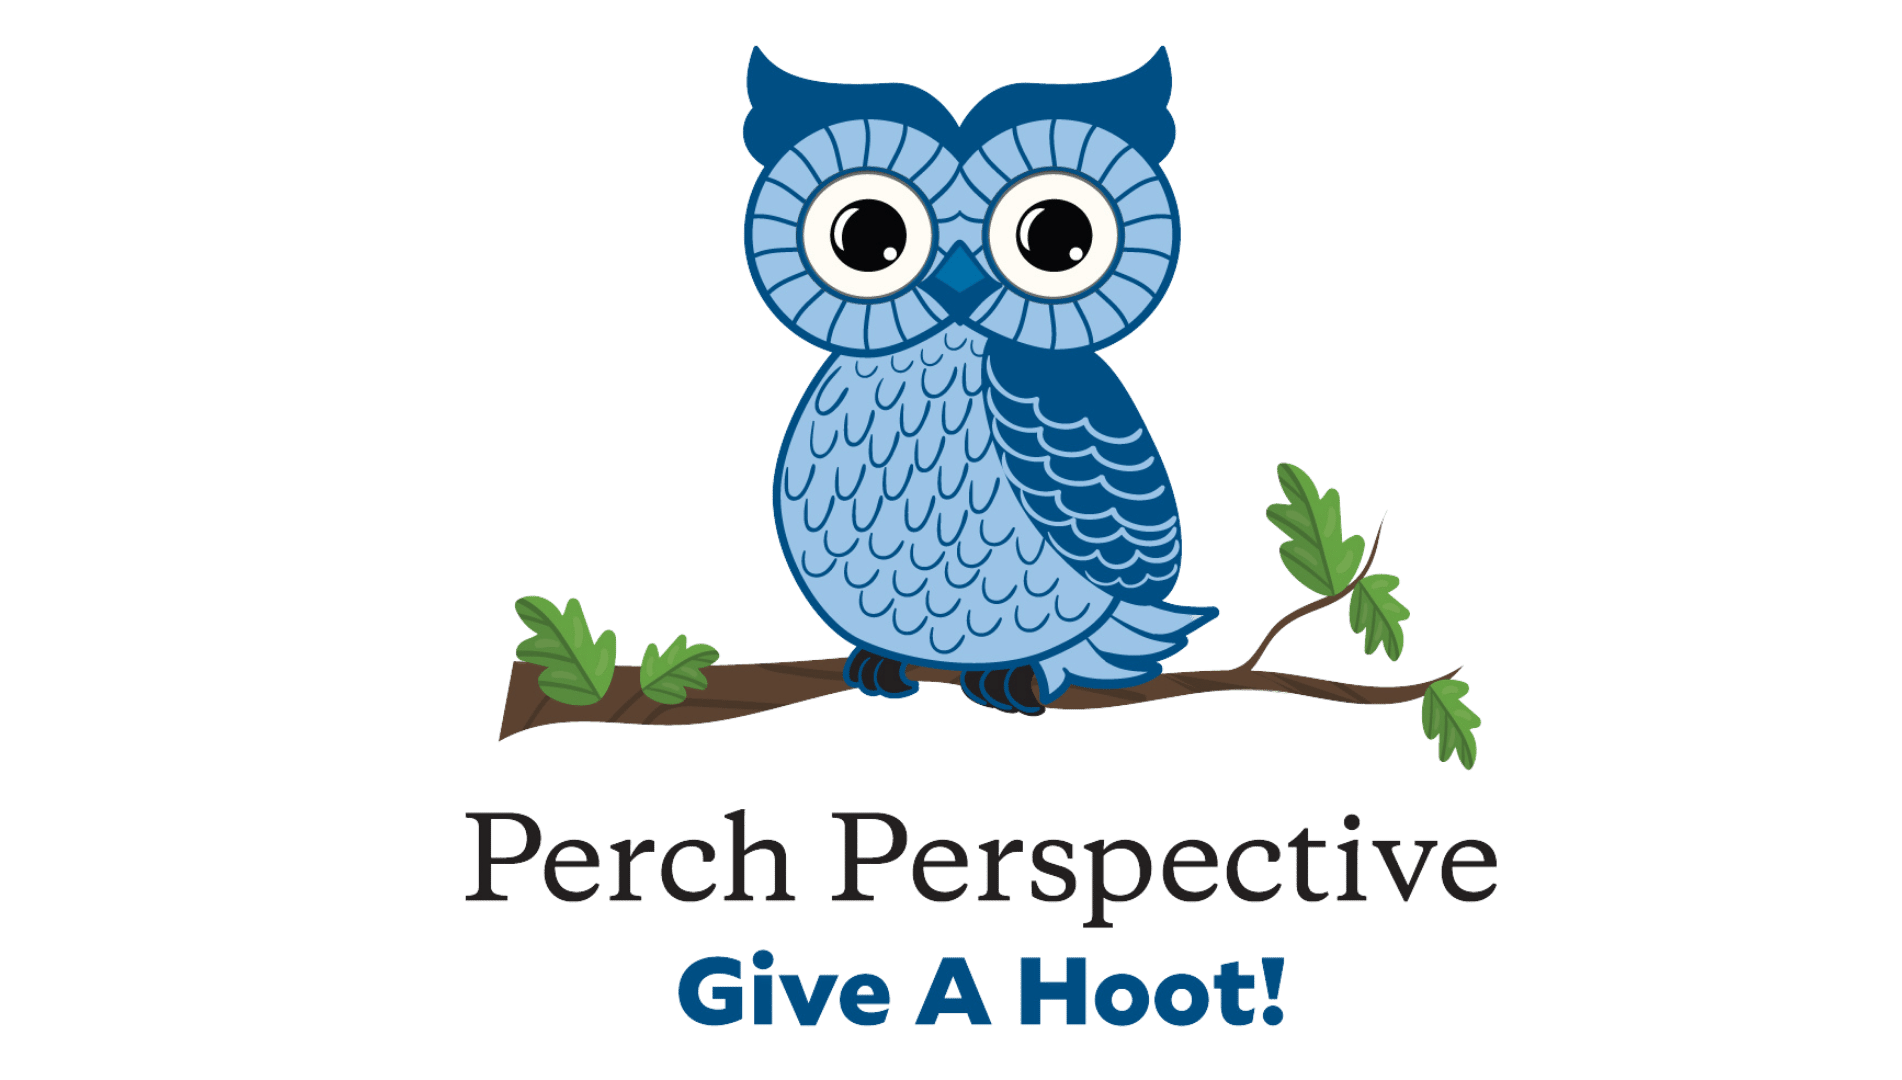 vector image with an owl on a branch for the perch perspective